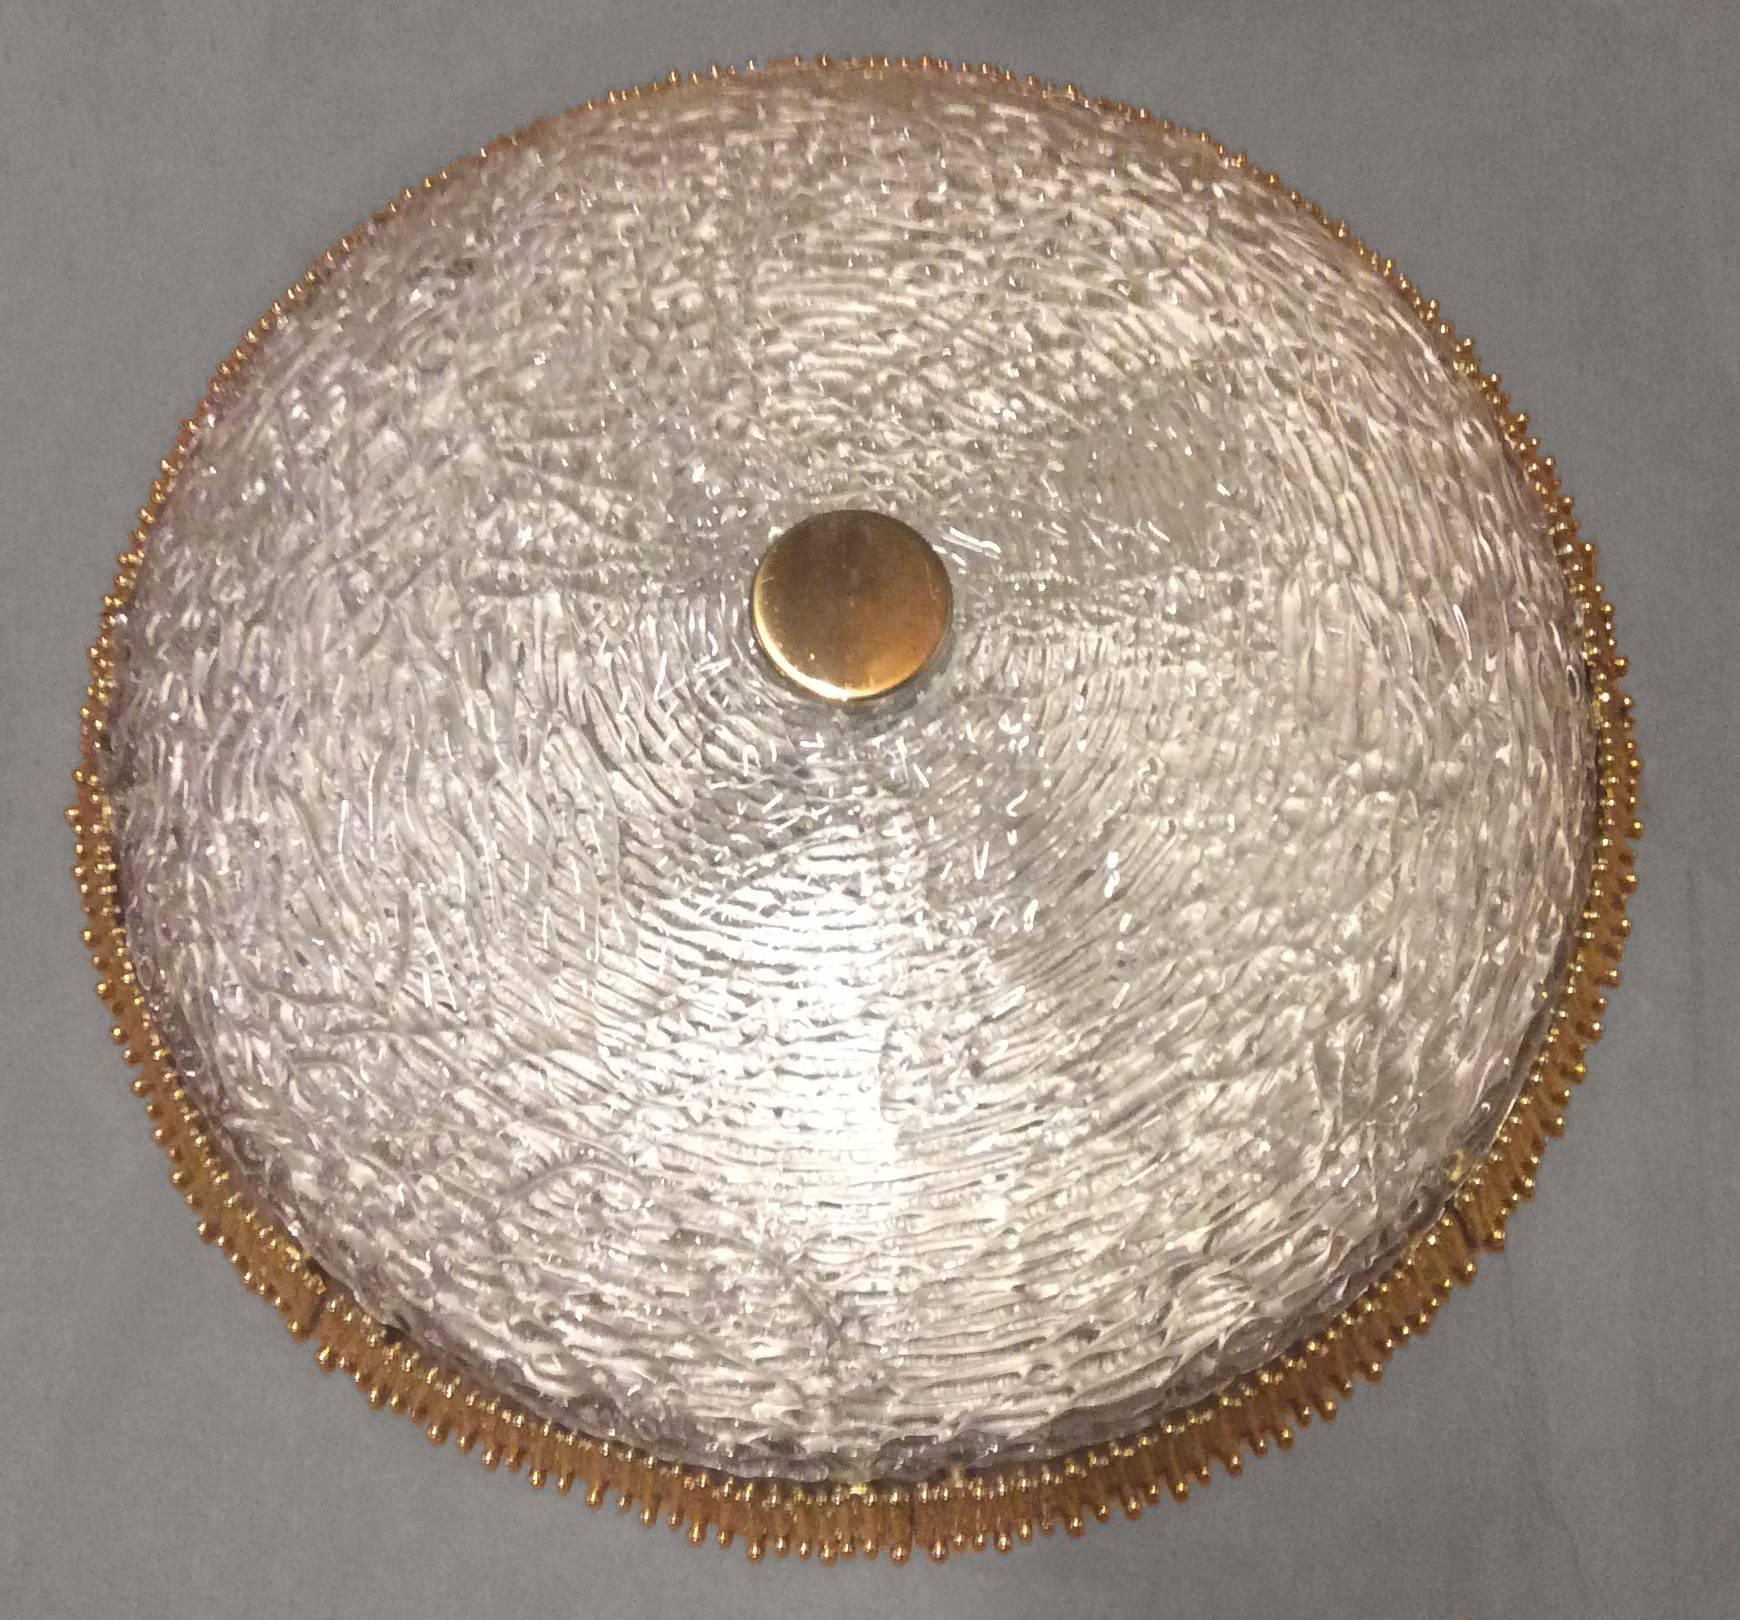 A flush mount textured clear glass fixture with circular textural brass detail by Hillebrand or Kaiser.

Circa 1960's

Two (2) Are Available.